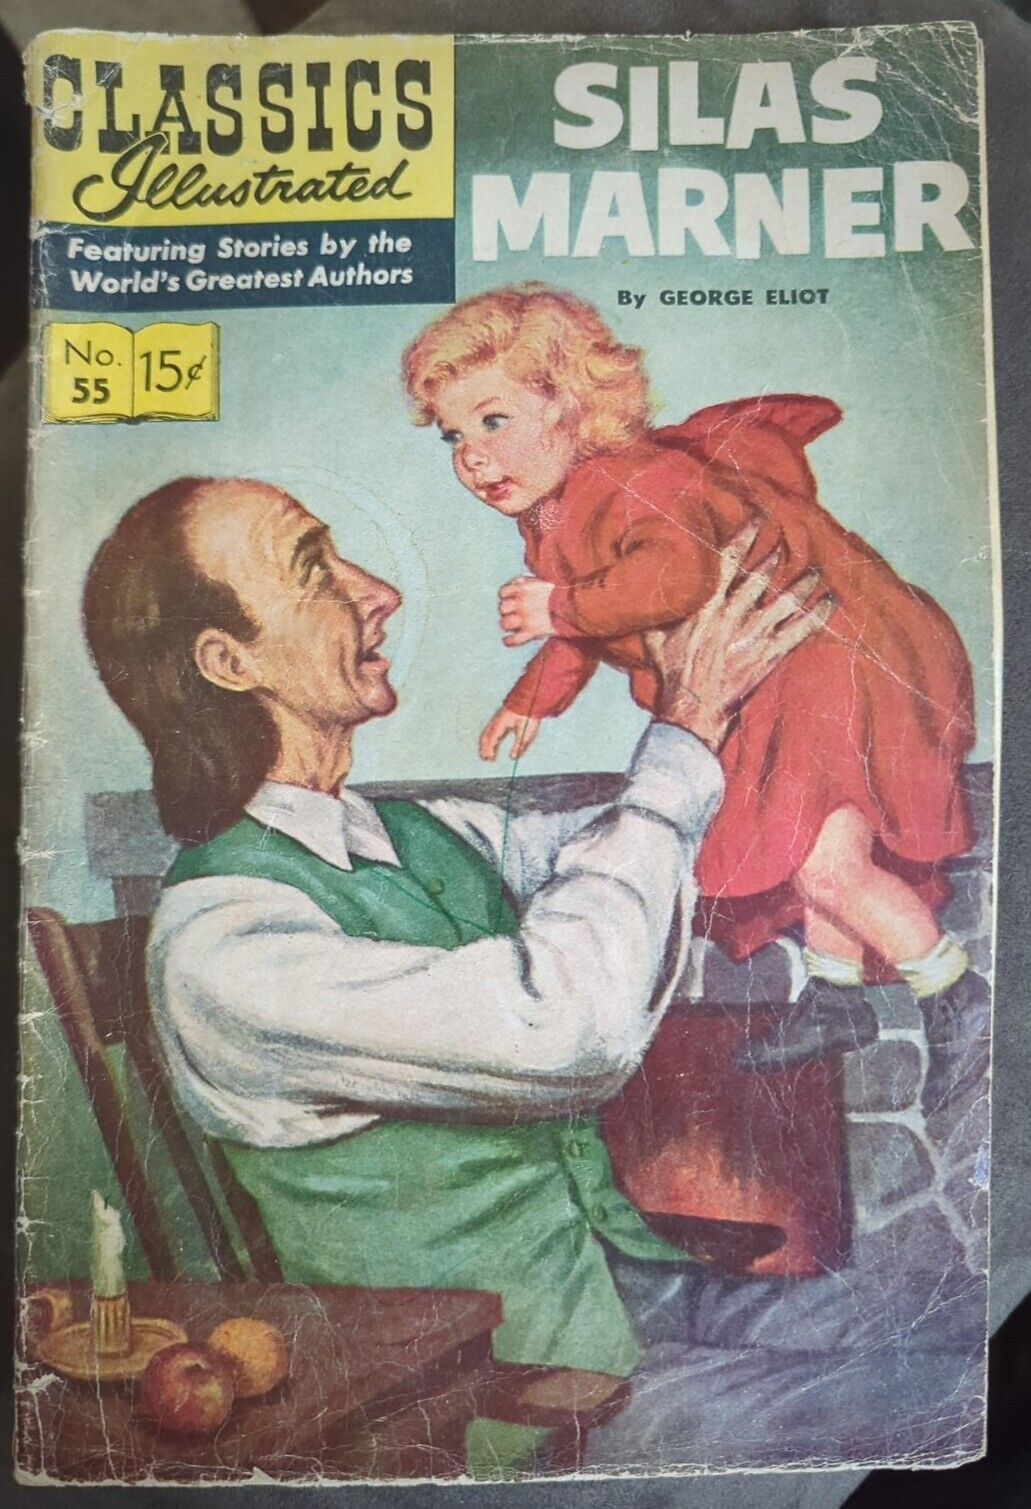 Vintage Classics Illustrated #55 Silas Marner By George Eliot